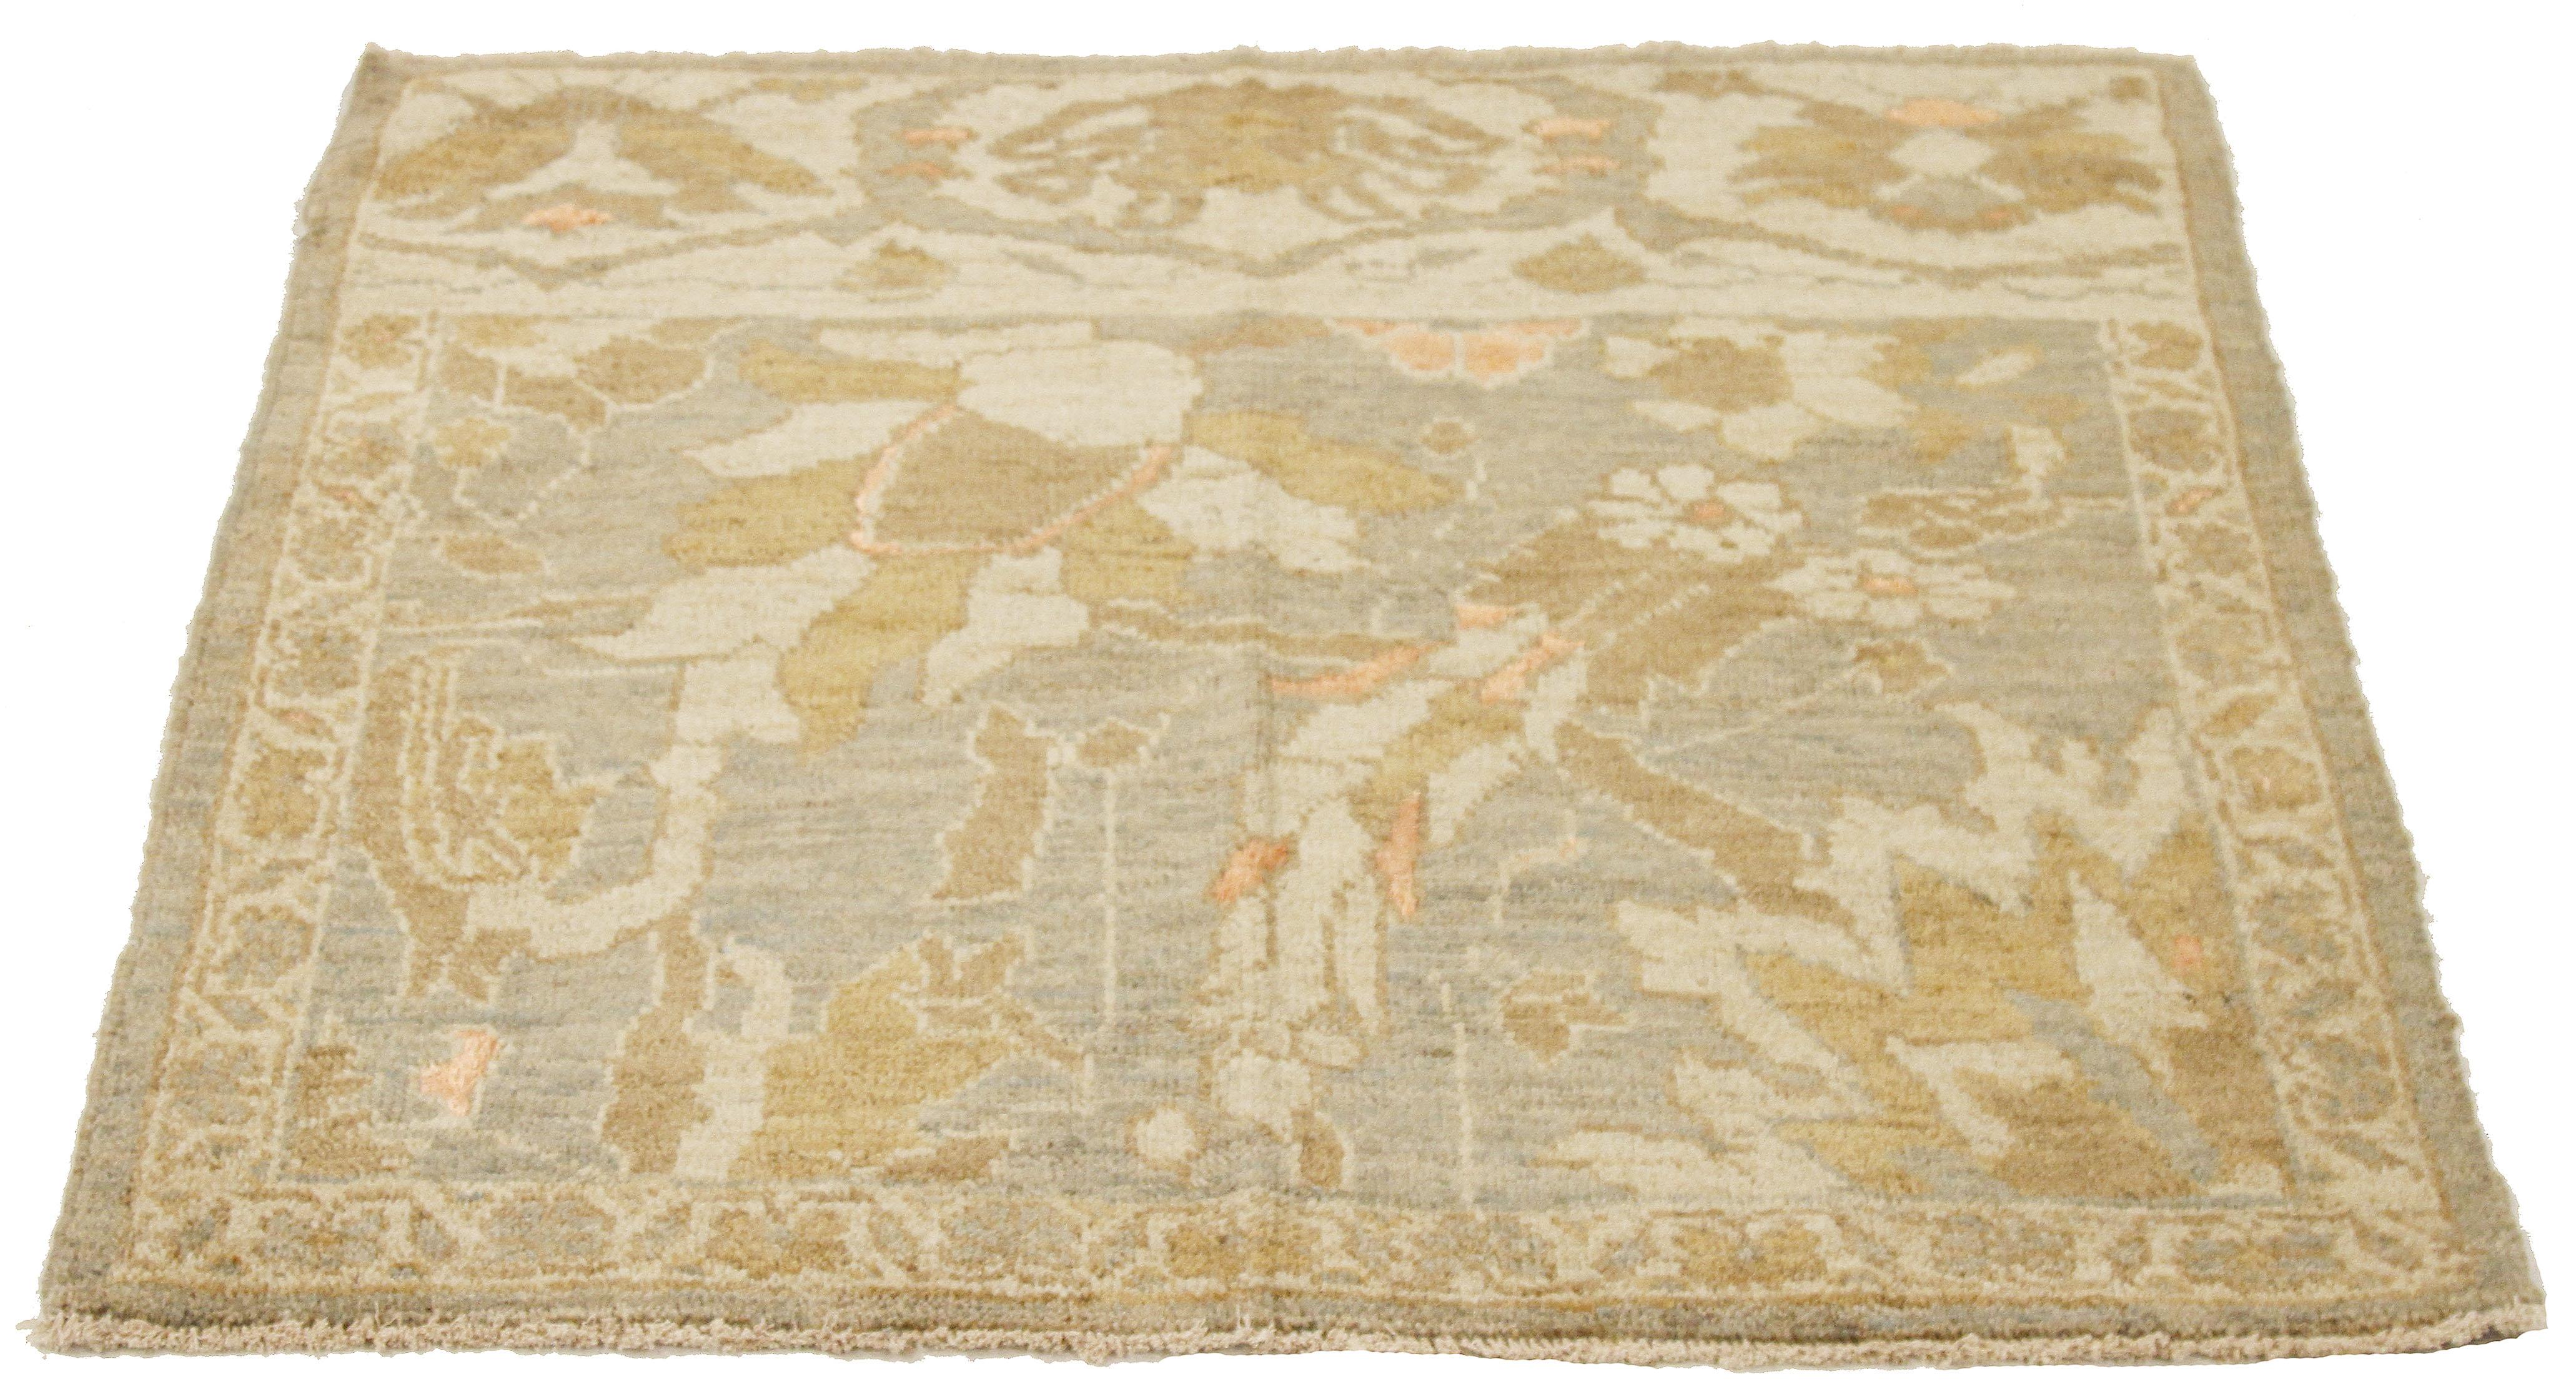 Modern handmade Persian area rug from high-quality sheep’s wool and colored with eco-friendly vegetable dyes that are proven safe for humans and pets alike. It’s a contemporary Sultanabad design showcasing a regal ivory field with prominent Herati